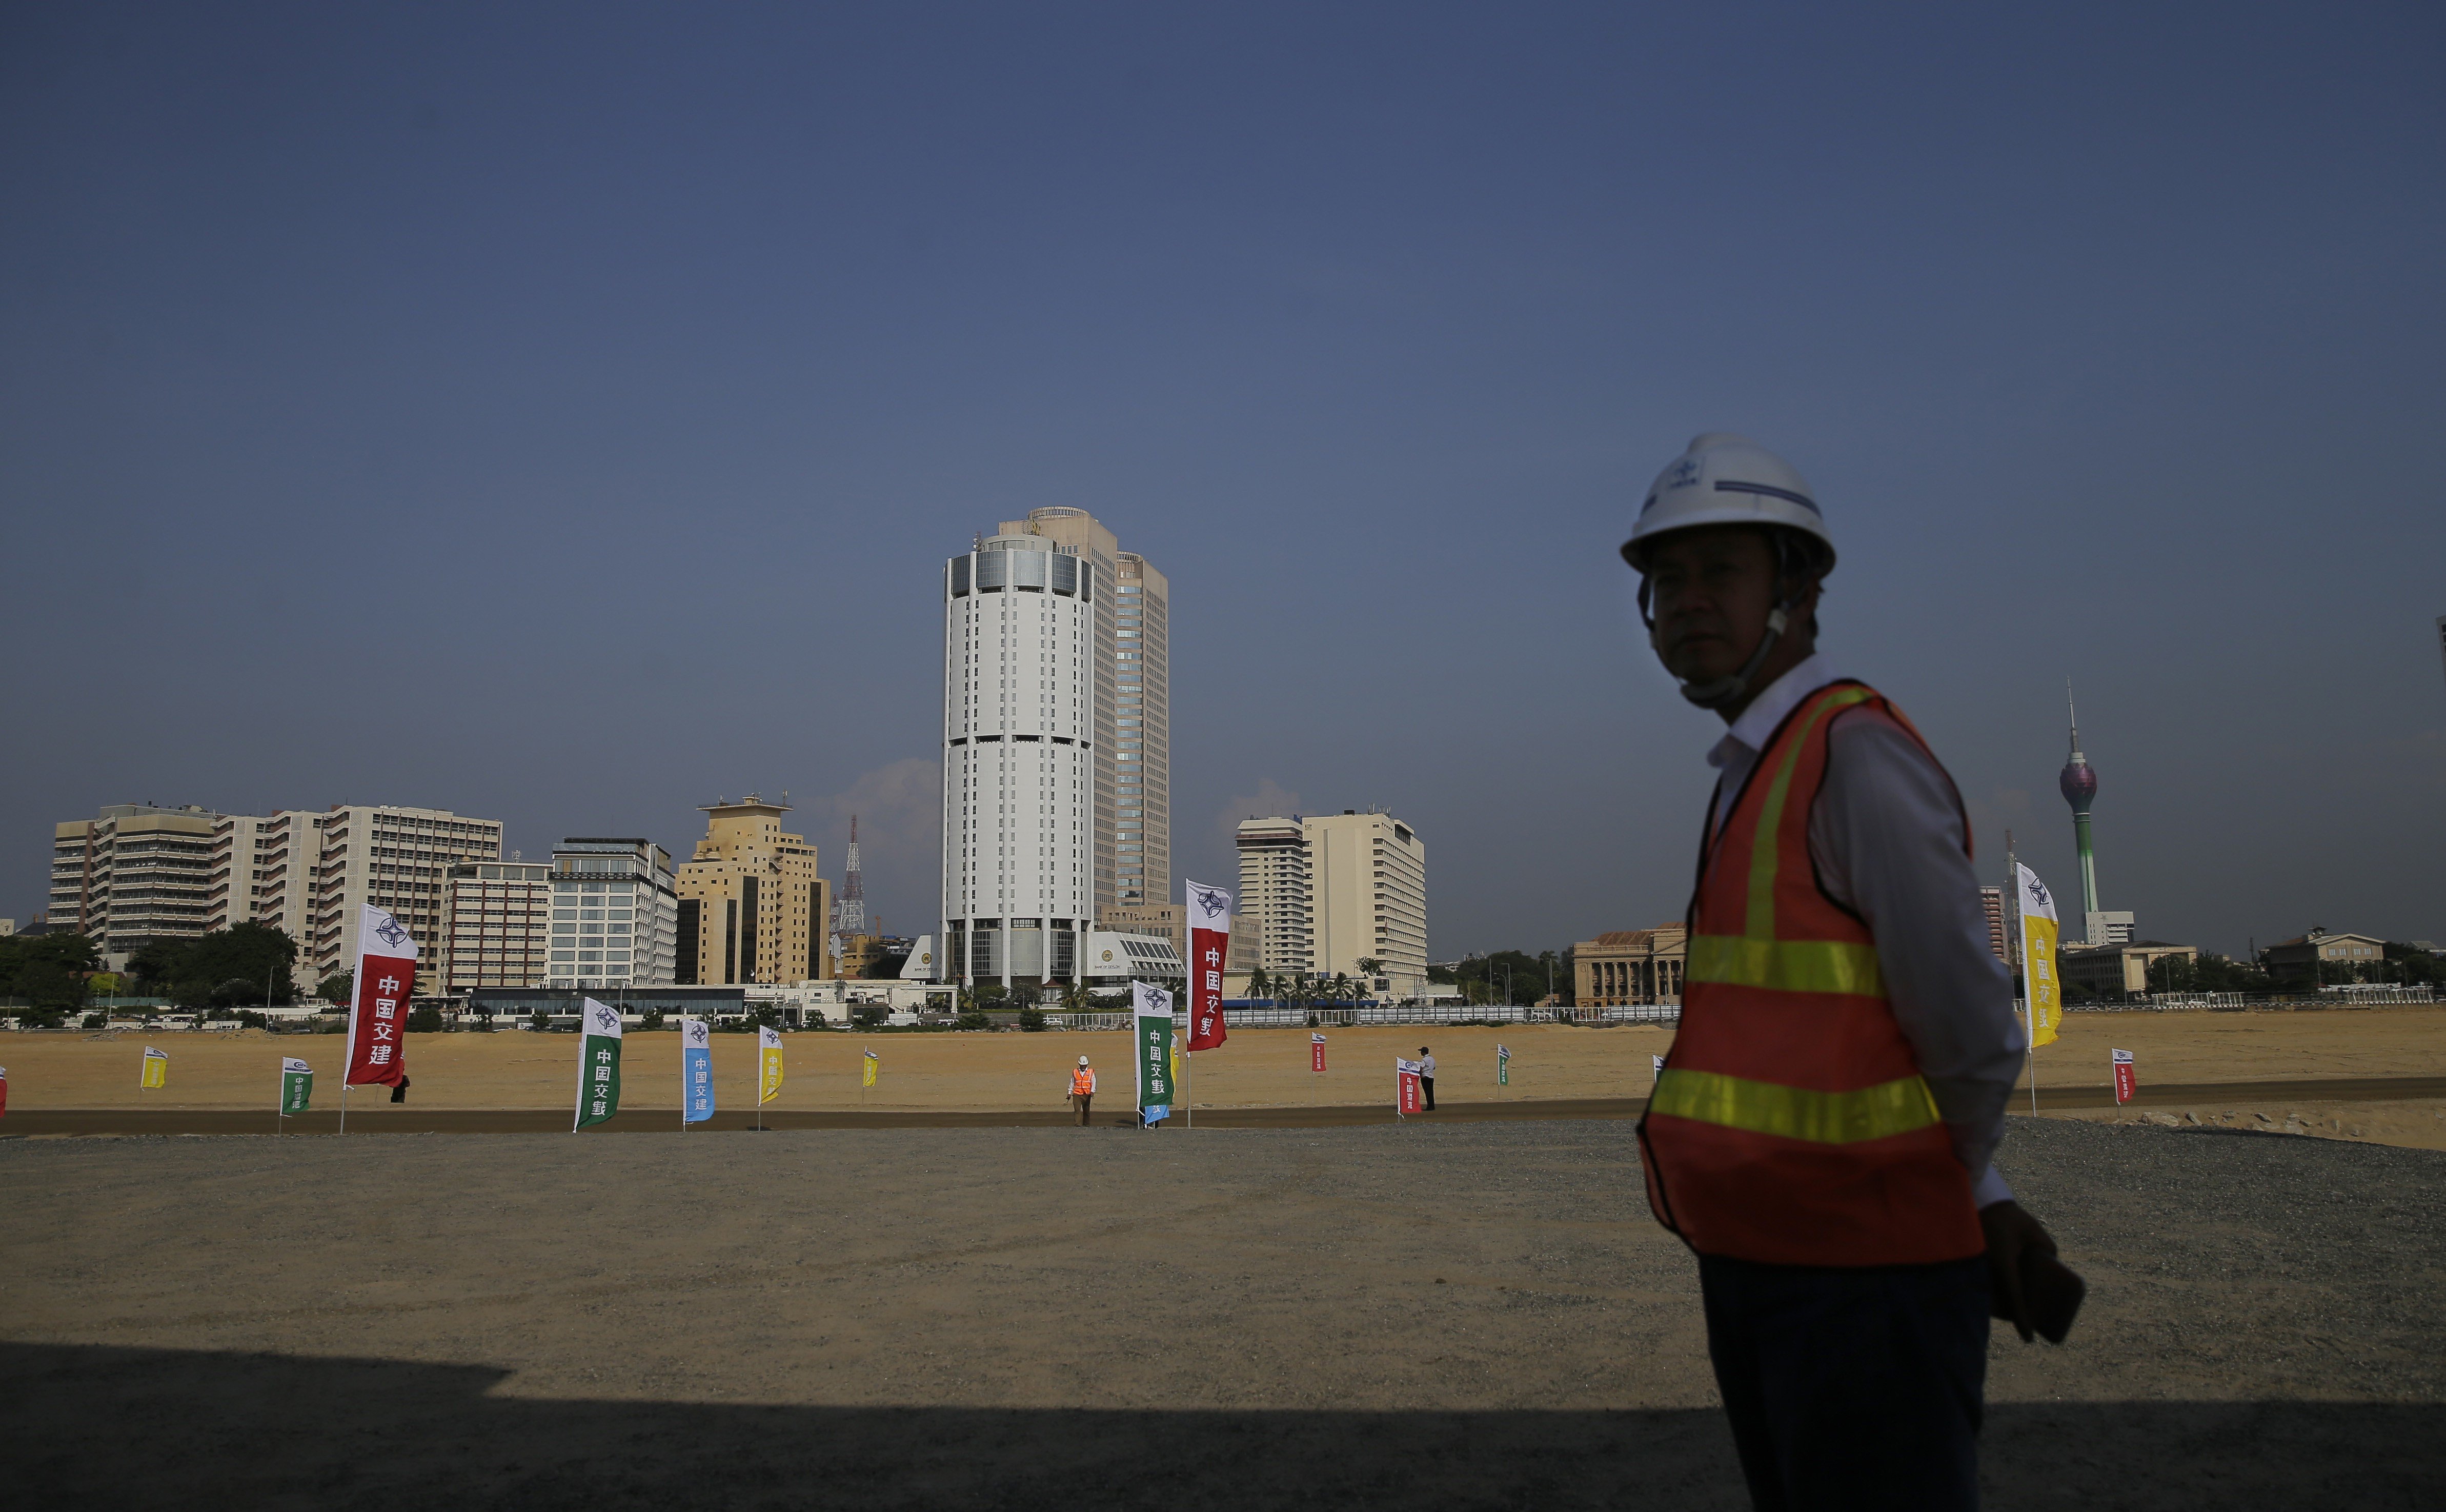 A Chinese construction worker stands on land that was reclaimed from the Indian Ocean for the Colombo Port City project, initiated as part of China's ambitious One Belt One Road initiative. Photo: AP Photo